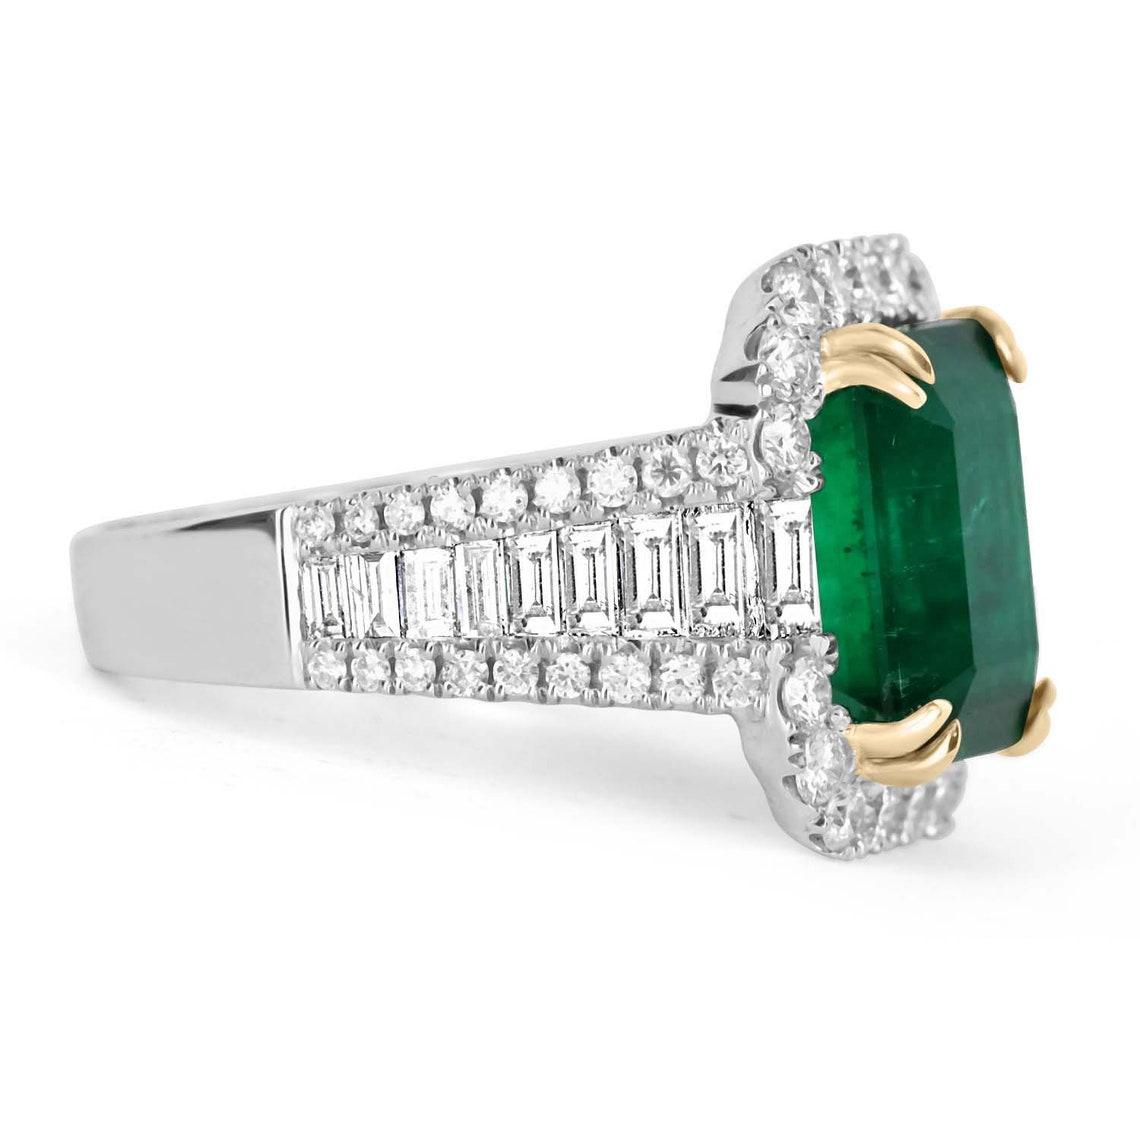 An exceptional Colombian emerald & diamond statement/anniversary ring. This fine quality ring is captivating from every angle. Incredible diamonds highlight the emerald, shank, and gallery of the ring. The emerald has vivid, vivacious green color